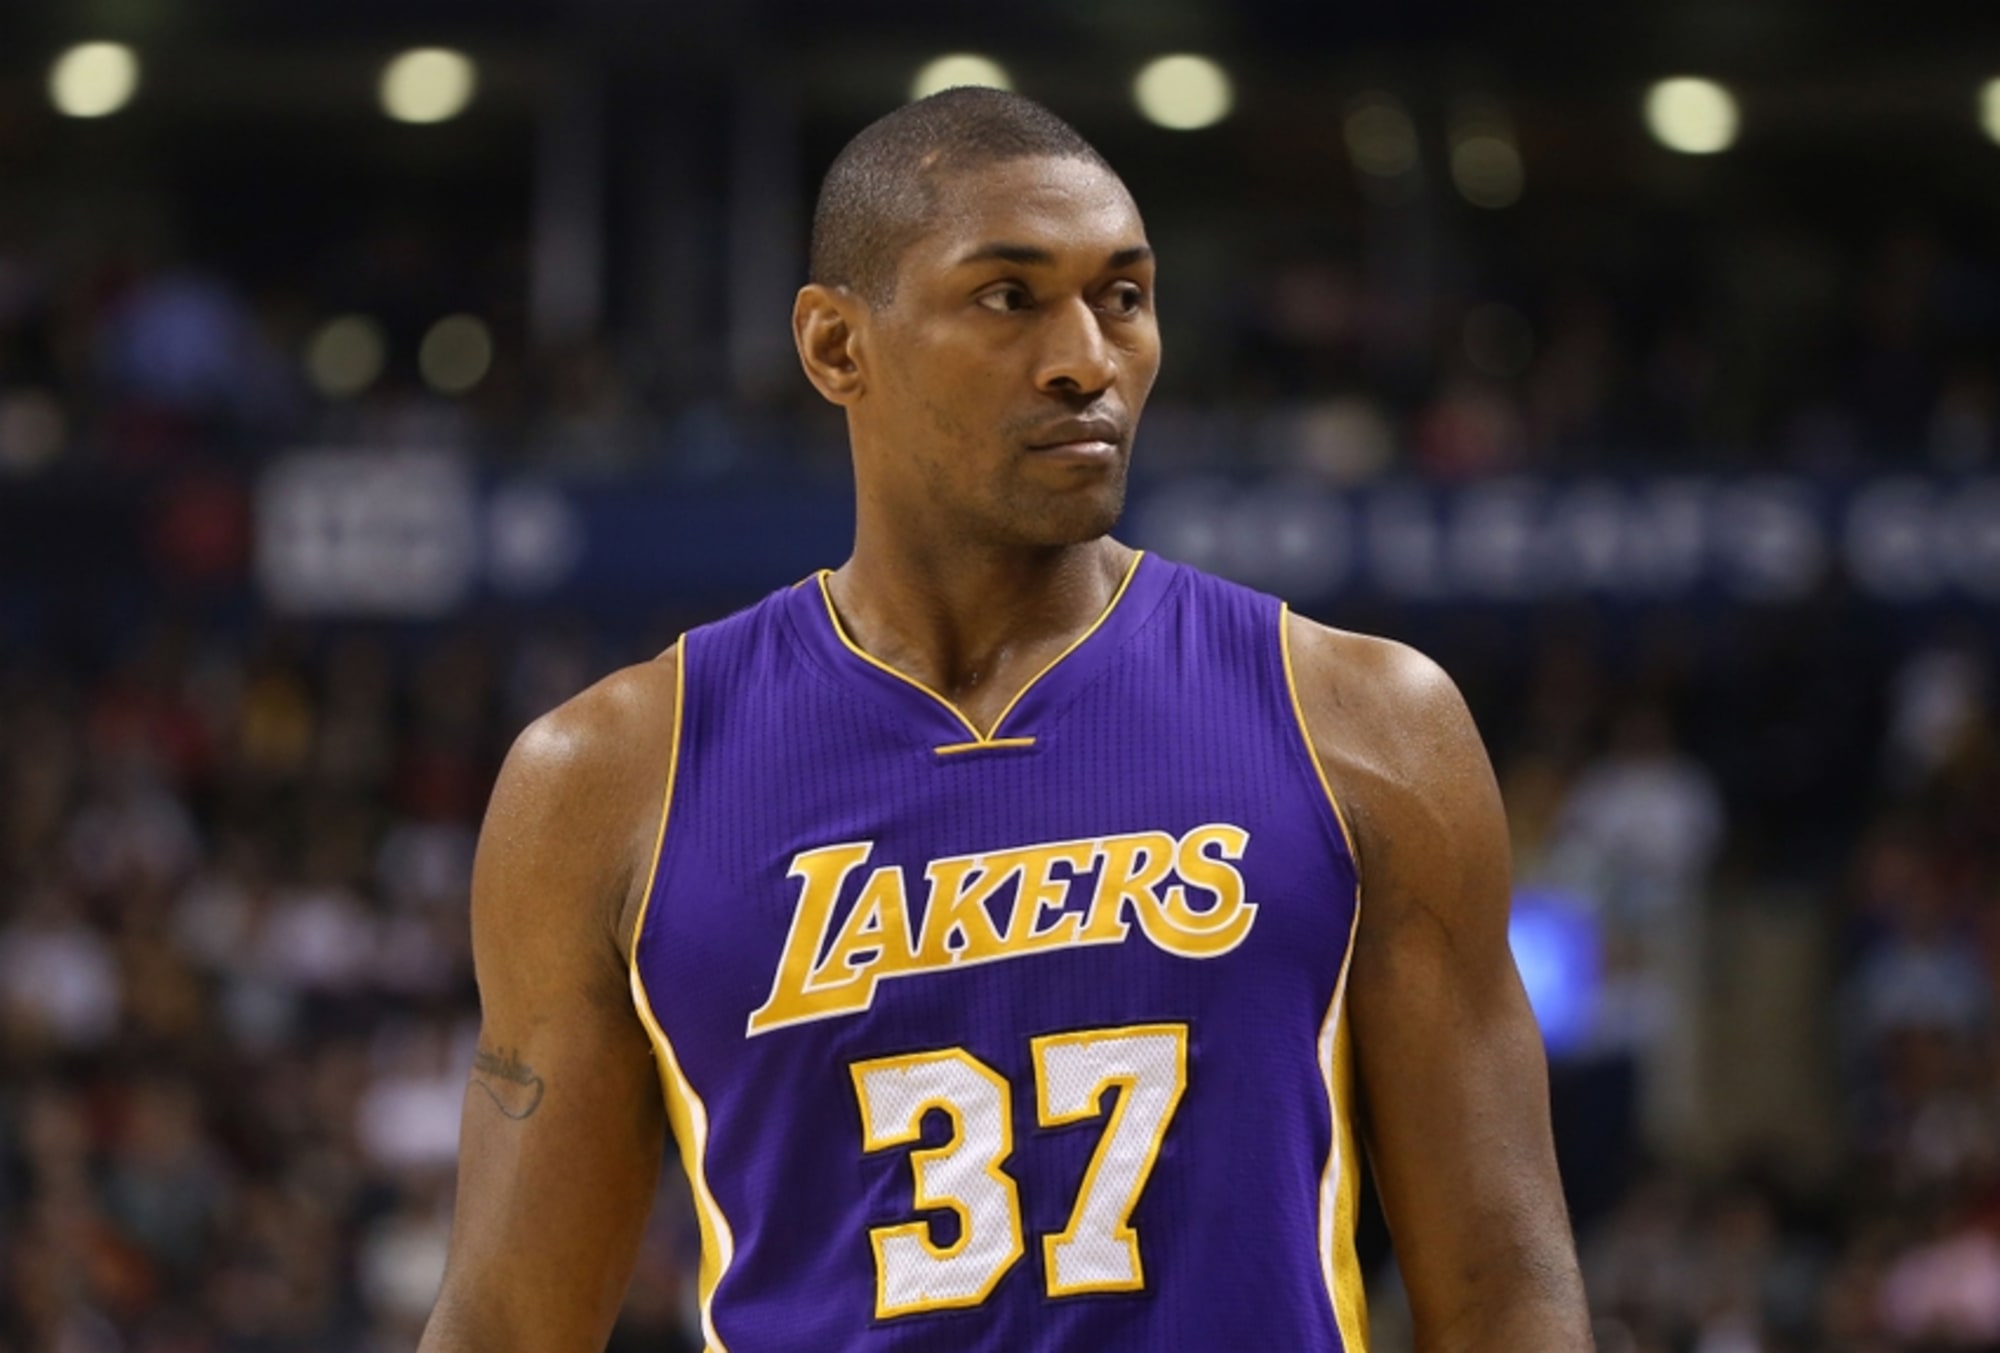 Lakers: Metta World Peace Launches New NFT Along With Shoe - All